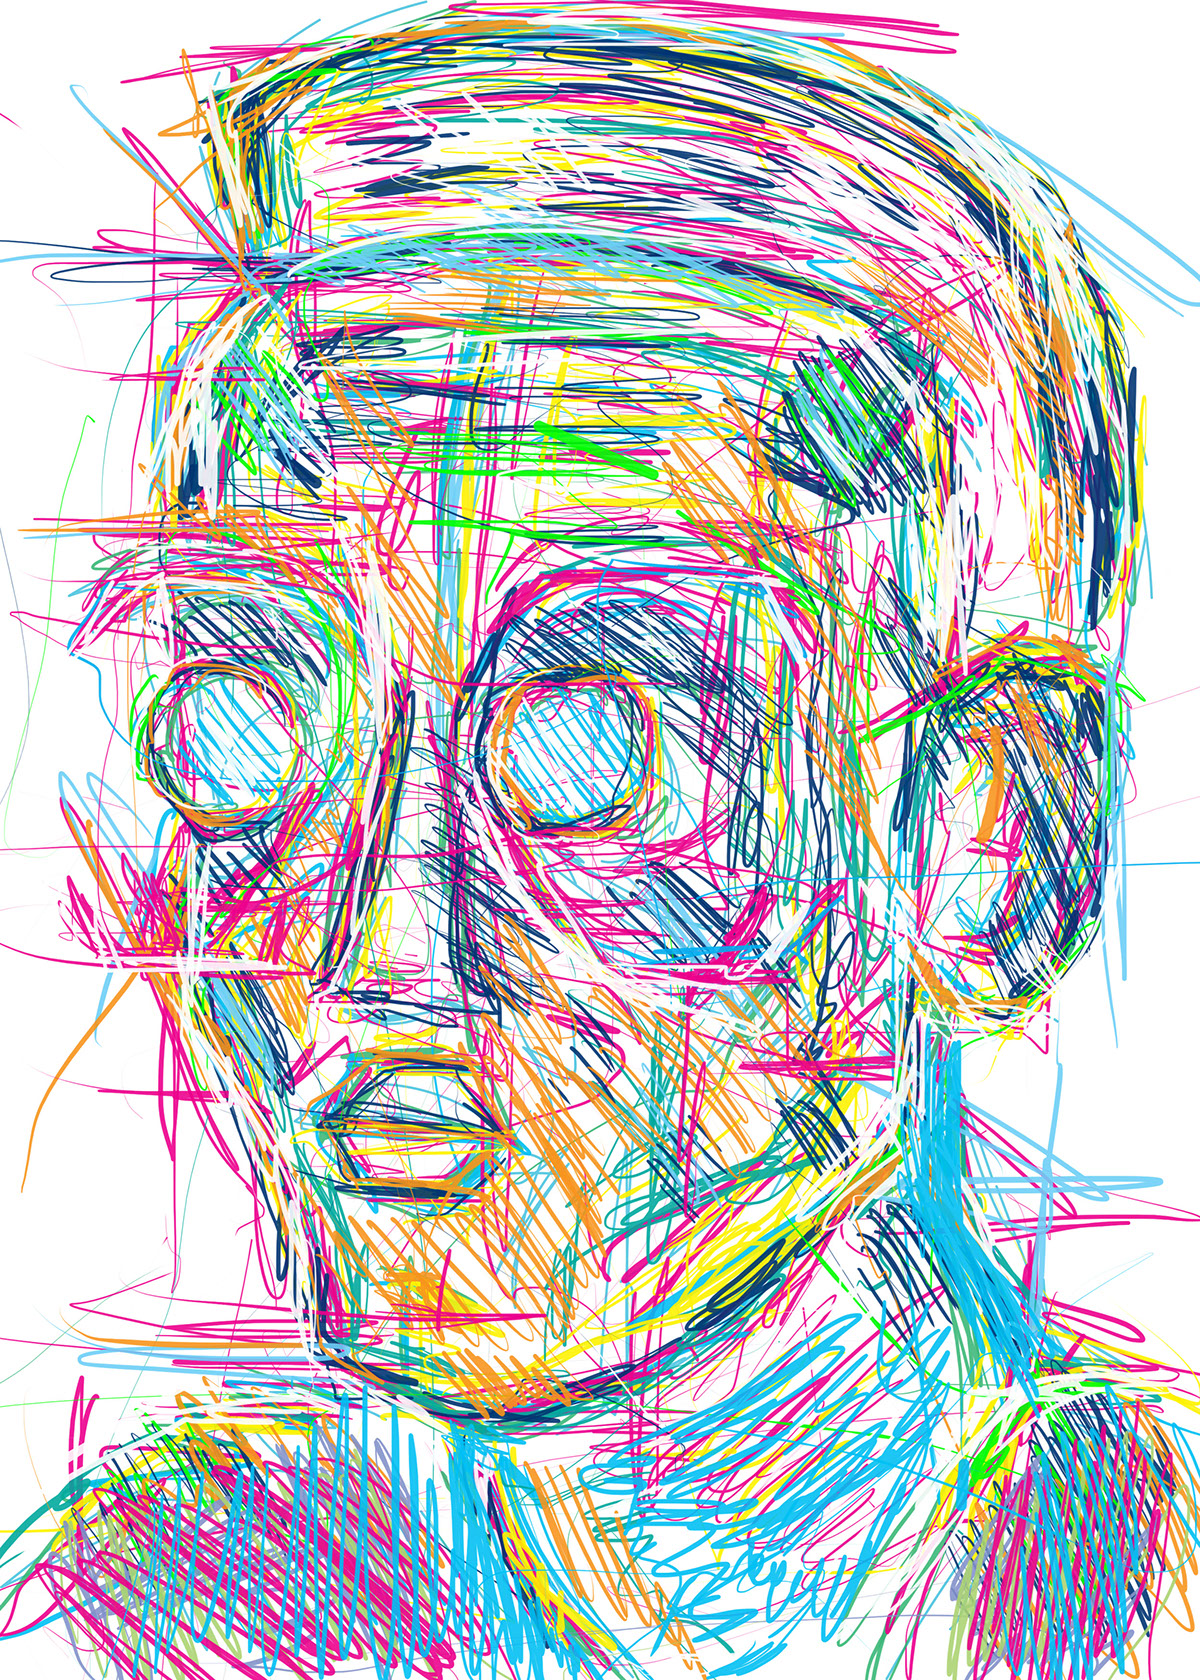 abstract art design creative different Colourful  sketchy vivid real life still life Portraiture face pose Posture giacometti